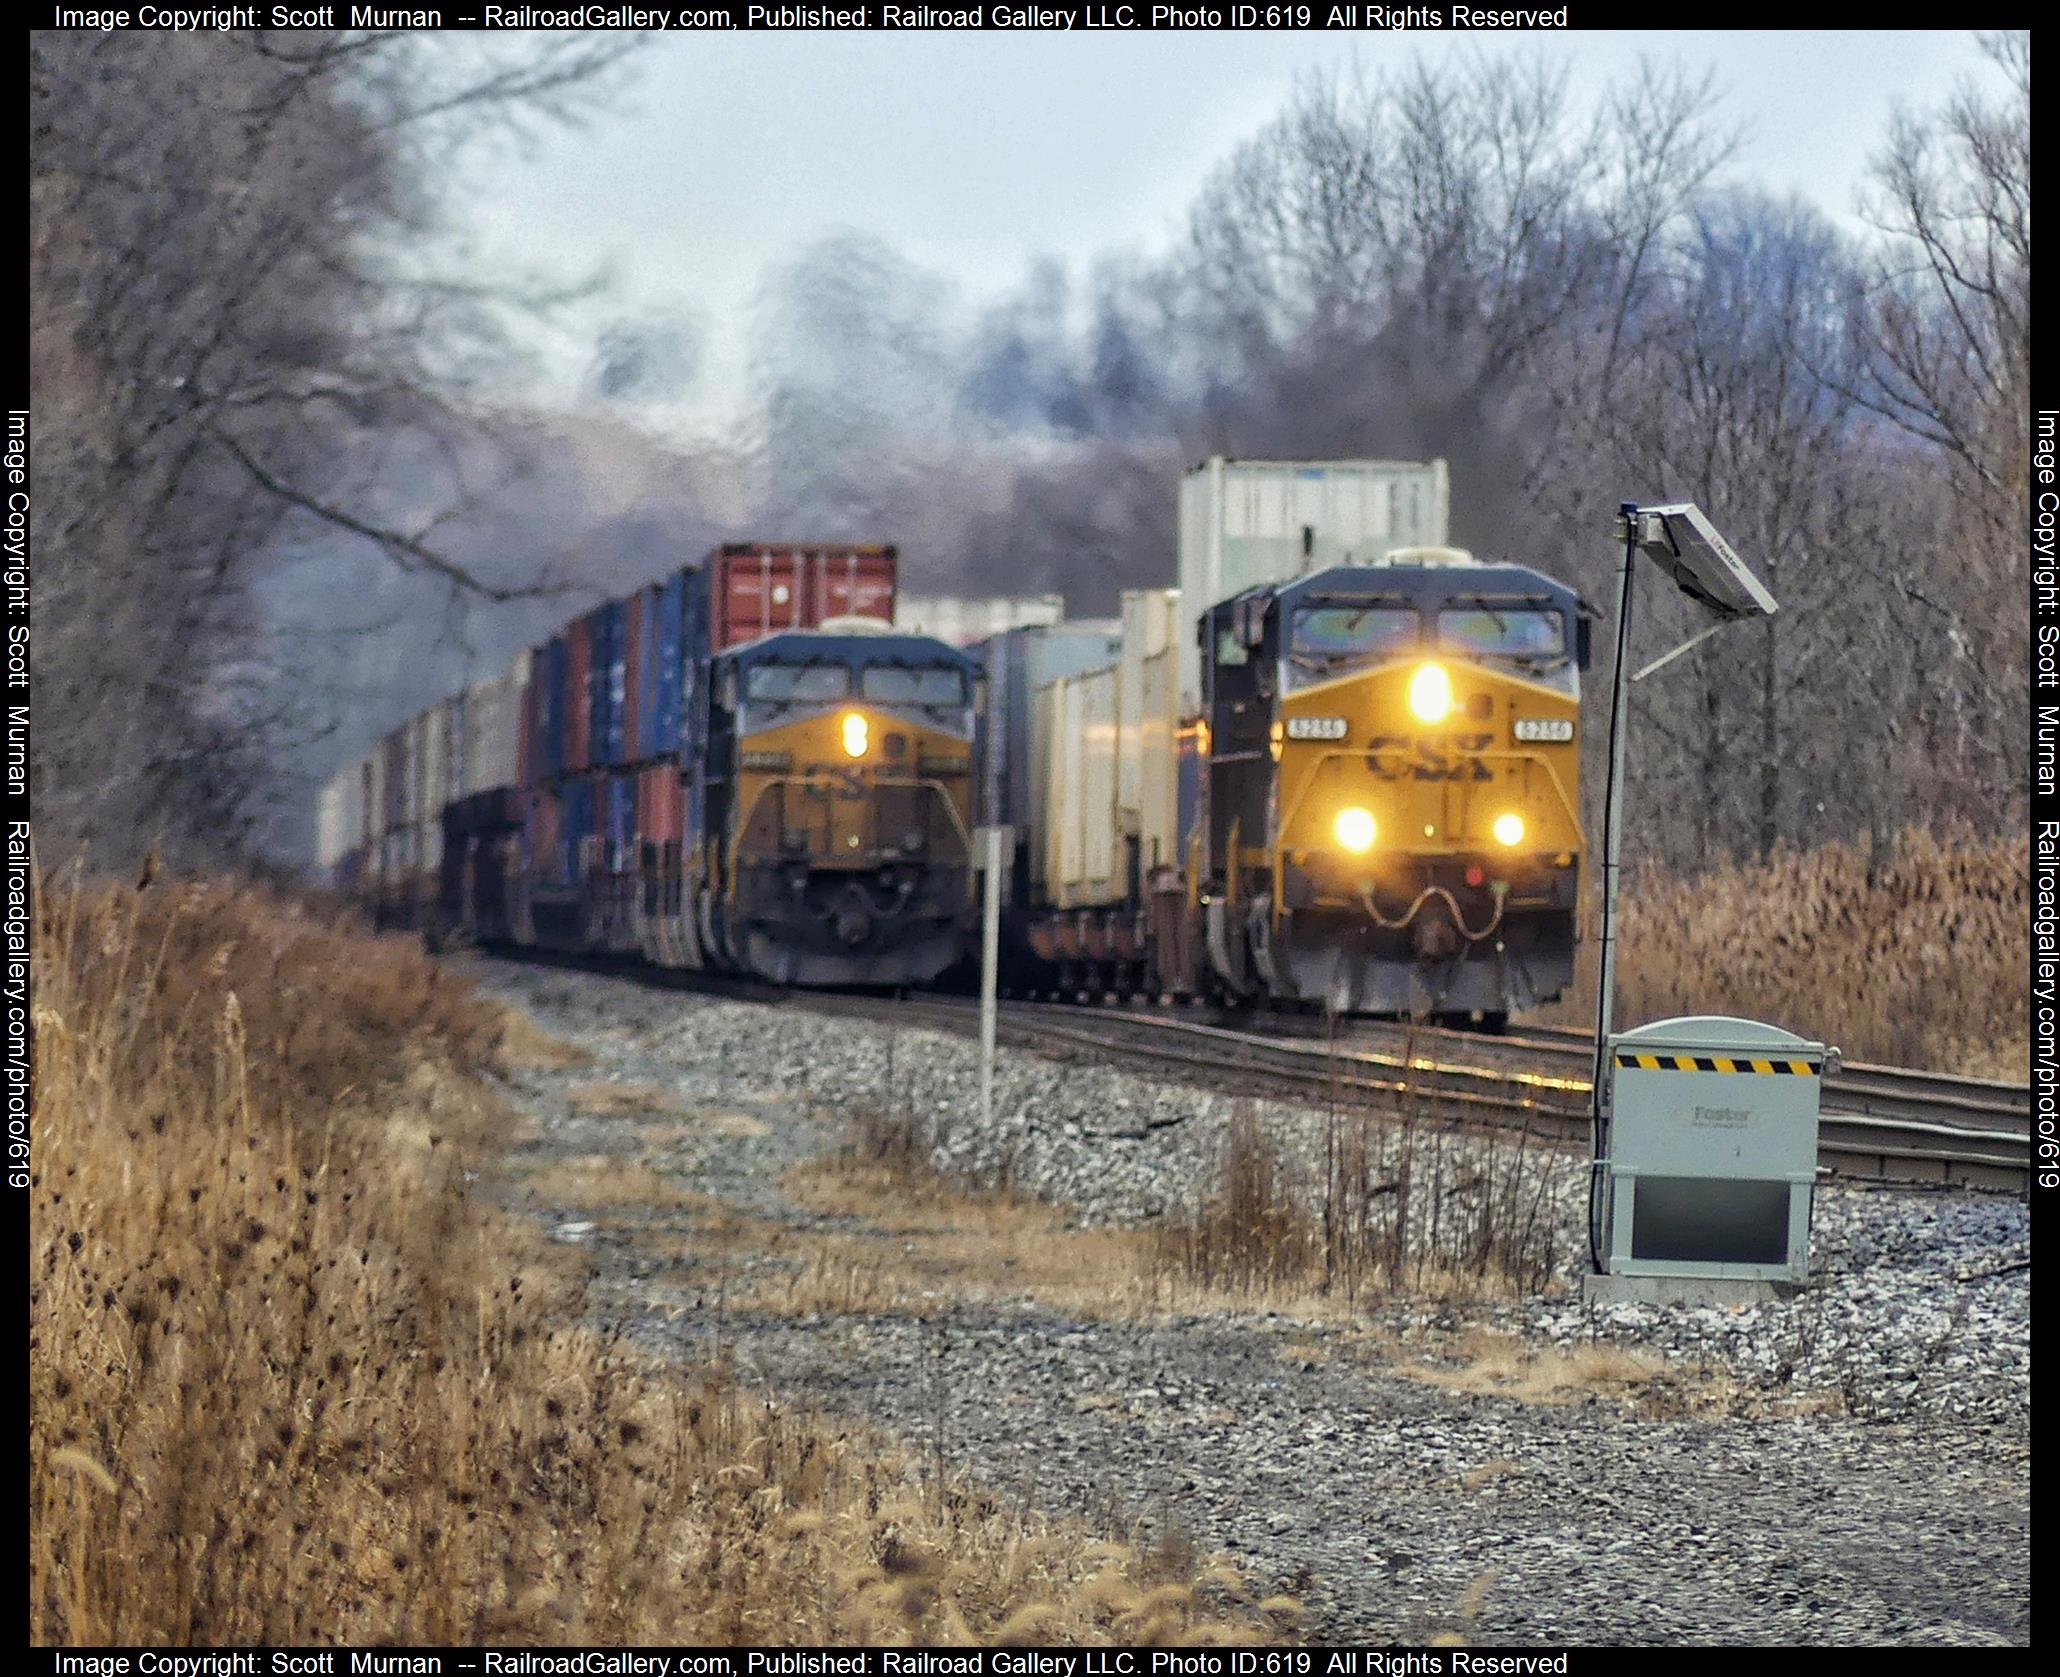 CSX 5256 is a class GE ES40DC and  is pictured in Macedon, New York, USA .  This was taken along the Rochester  on the CSX Transportation. Photo Copyright: Scott  Murnan  uploaded to Railroad Gallery on 01/24/2023. This photograph of CSX 5256 was taken on Sunday, January 22, 2023. All Rights Reserved. 